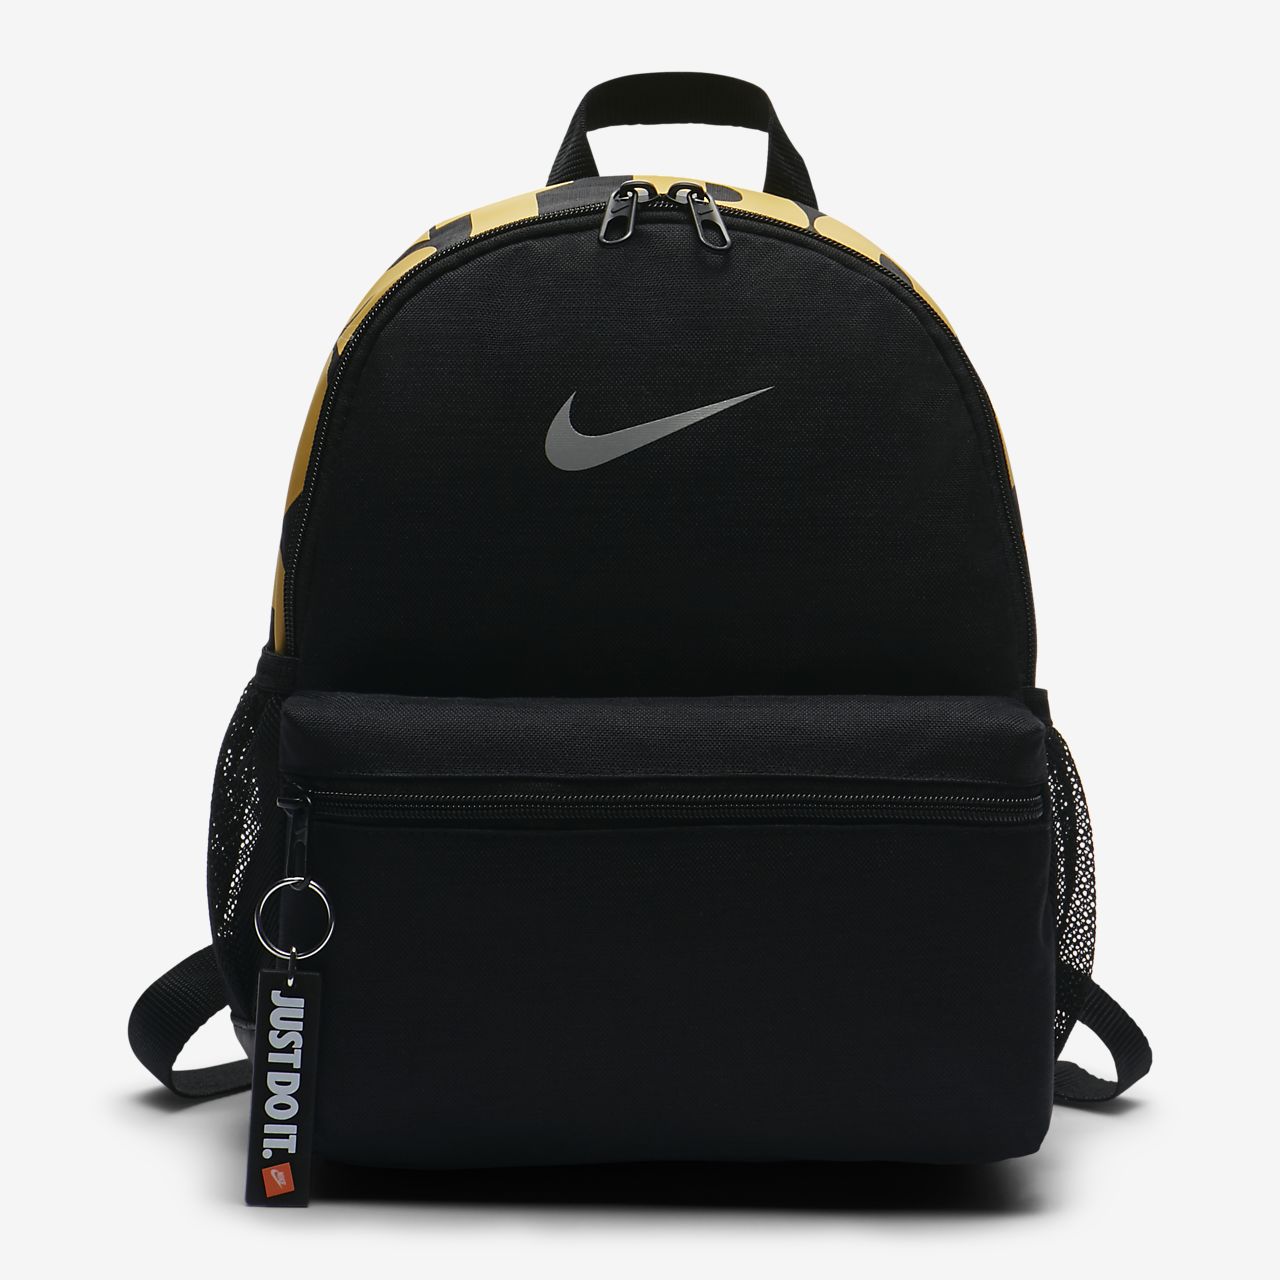 sac a dos nike homme blanche